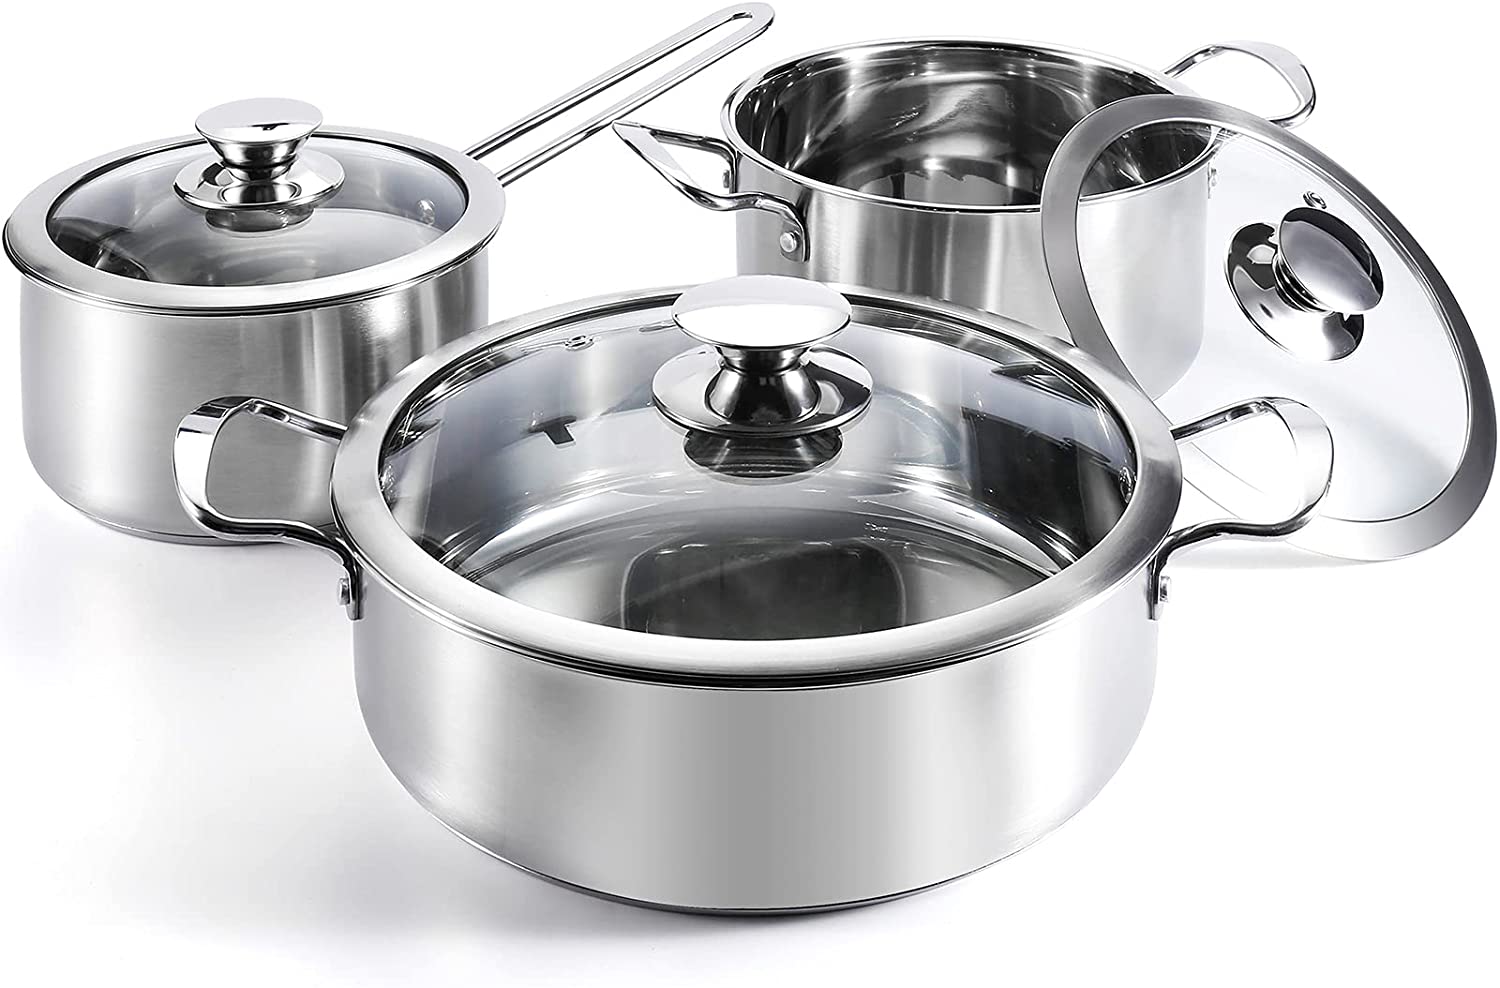 Stainless Steel Pots and Pans Set